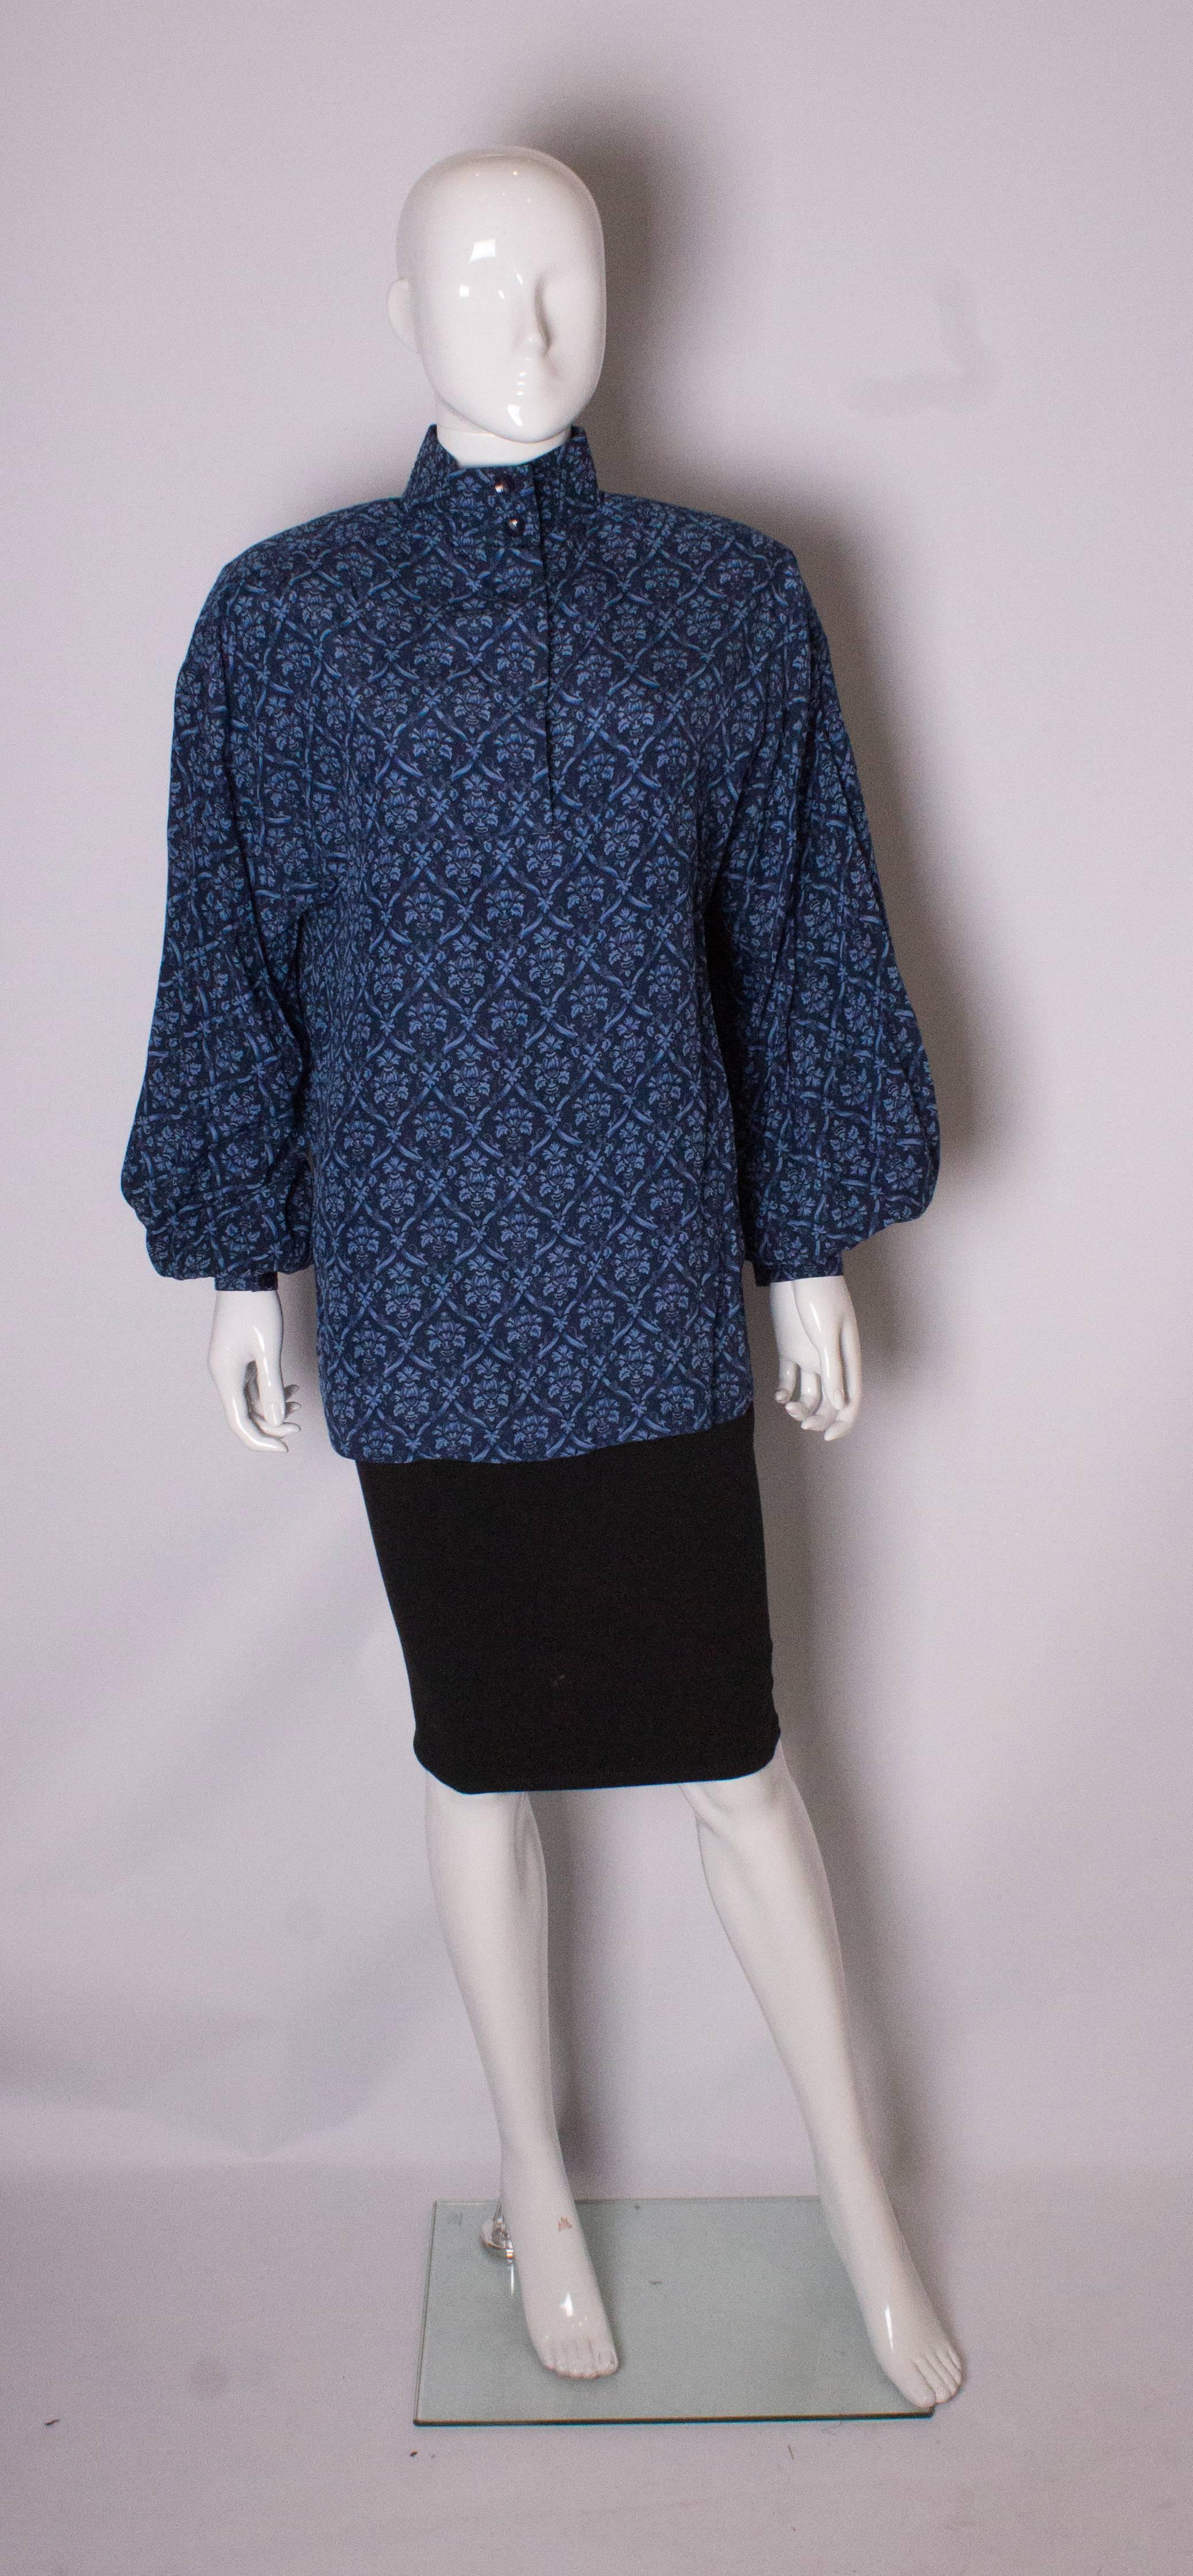 A chic vintage silk blouse by Fendi. In a pretty pattern in several shades of blue, the  blouse has interesting stitch detail on the shoulders and collar. It has double button cuffs and a 5 button opening .Bust up to 44'', but it looks better worn